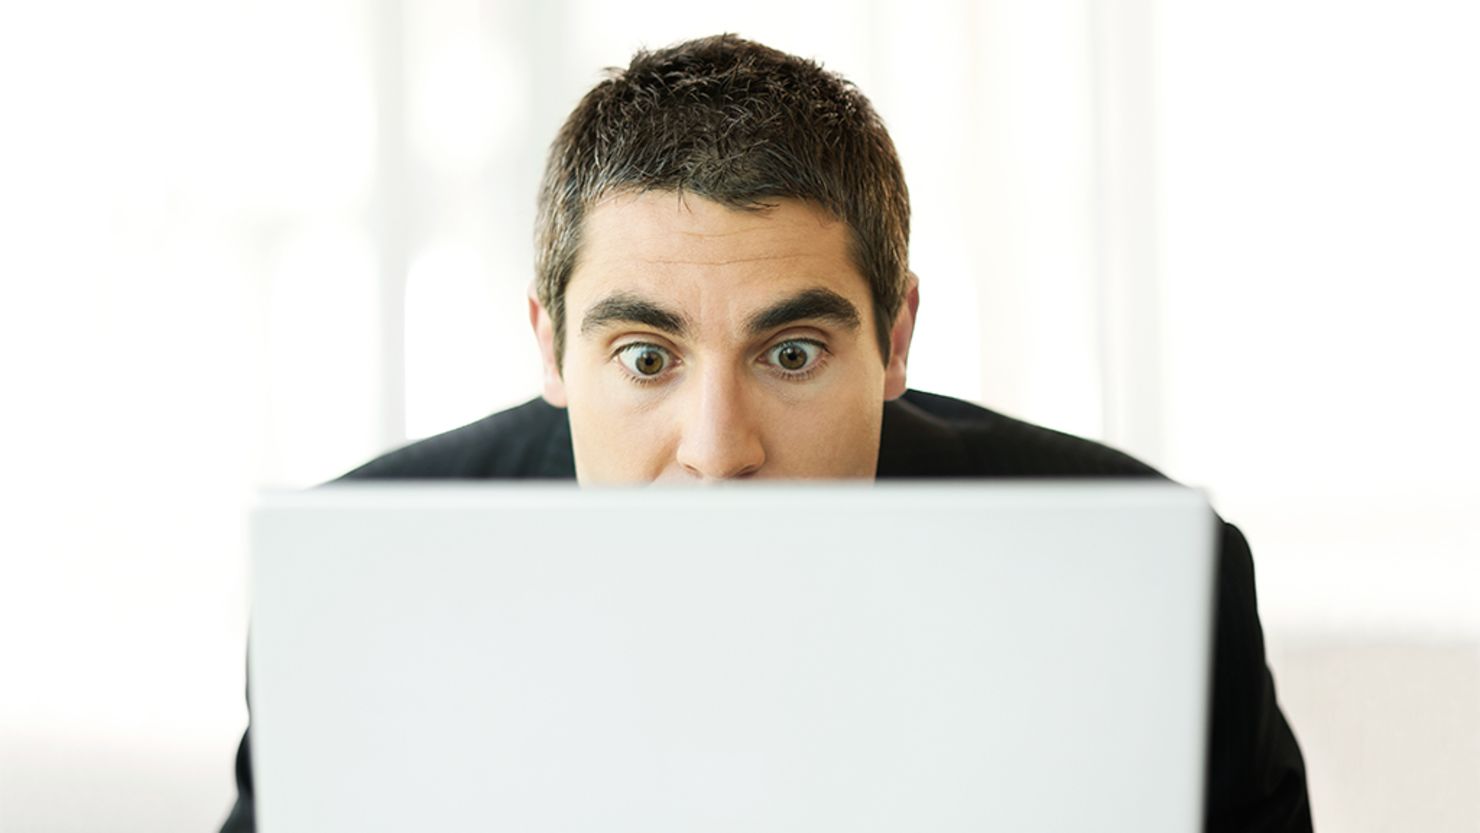 Making an effort to blink more often when working on a computer is one tool to help avoid eyestrain.